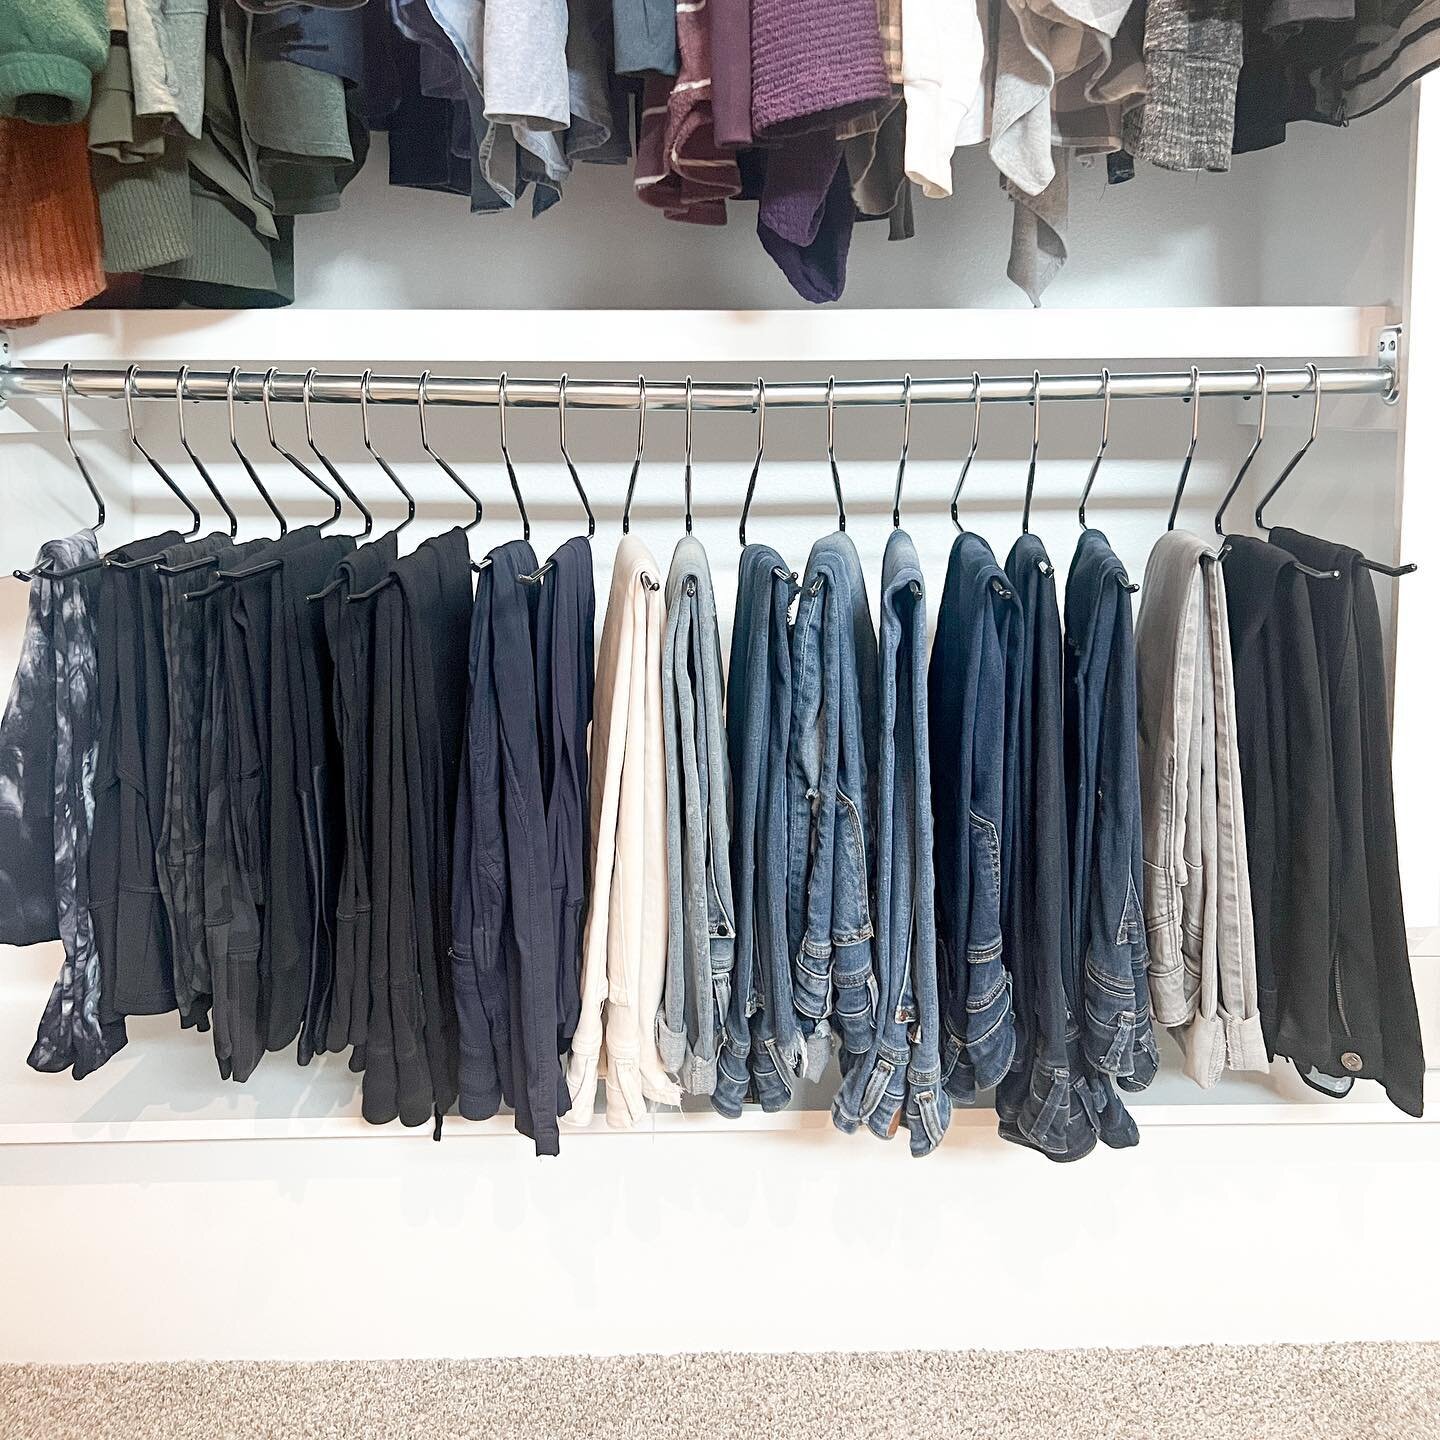 When it comes to pants, are you Team Hang or Team Fold? If you have more hanging space and prefer to hang your pants, these hangers are a must! You can easily grab the pair you need and they won&rsquo;t just bunch up at the end of the hanger!⁣
⁣
#org